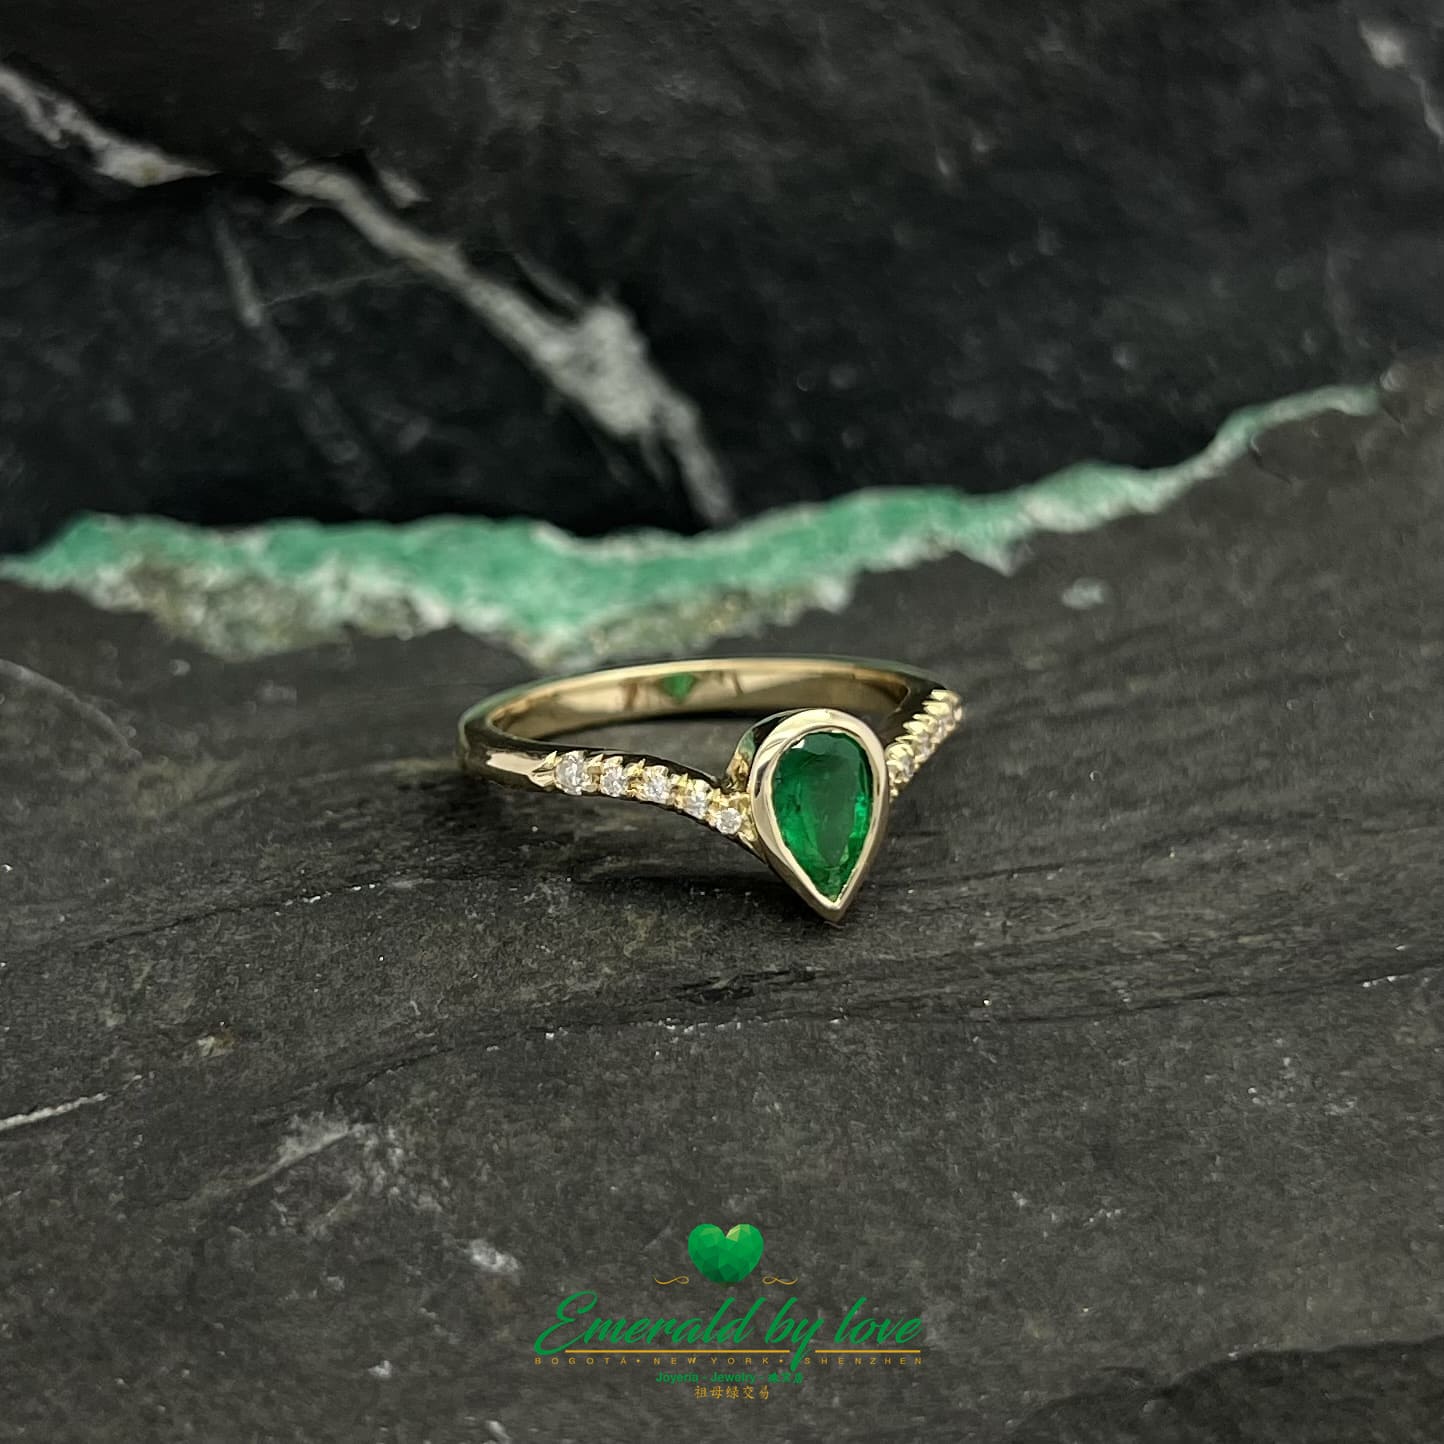 Yellow Gold Ring with Pear-Shaped Emerald Bezel-Set and Diamond Accents